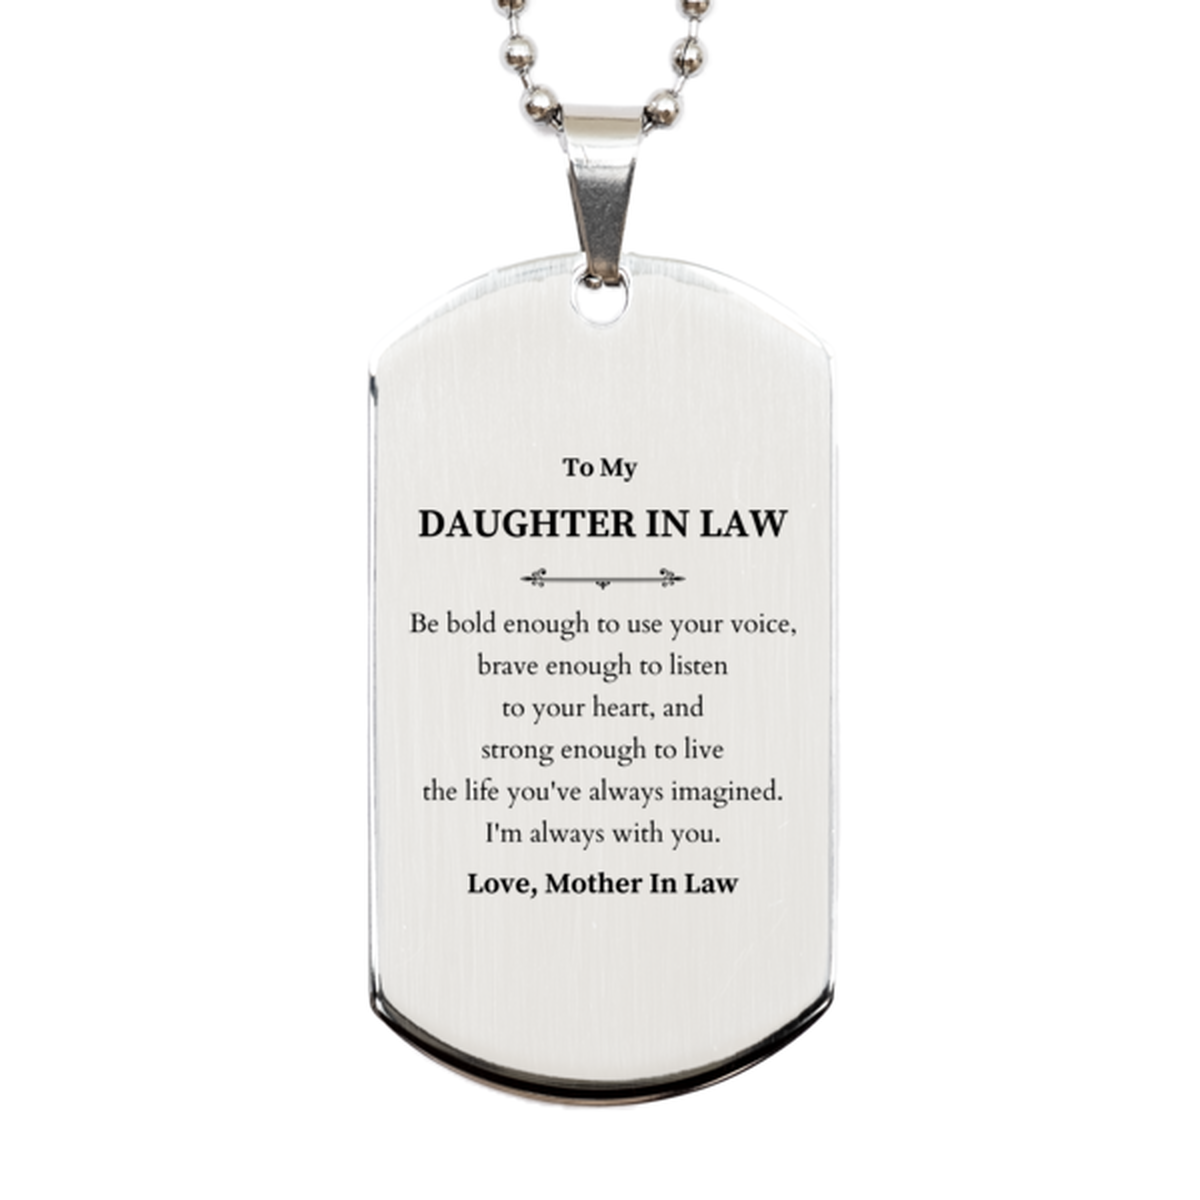 Keepsake Daughter In Law Silver Dog Tag Gift Idea Graduation Christmas Birthday Daughter In Law from Mother In Law, Daughter In Law Be bold enough to use your voice, brave enough to listen to your heart. Love, Mother In Law